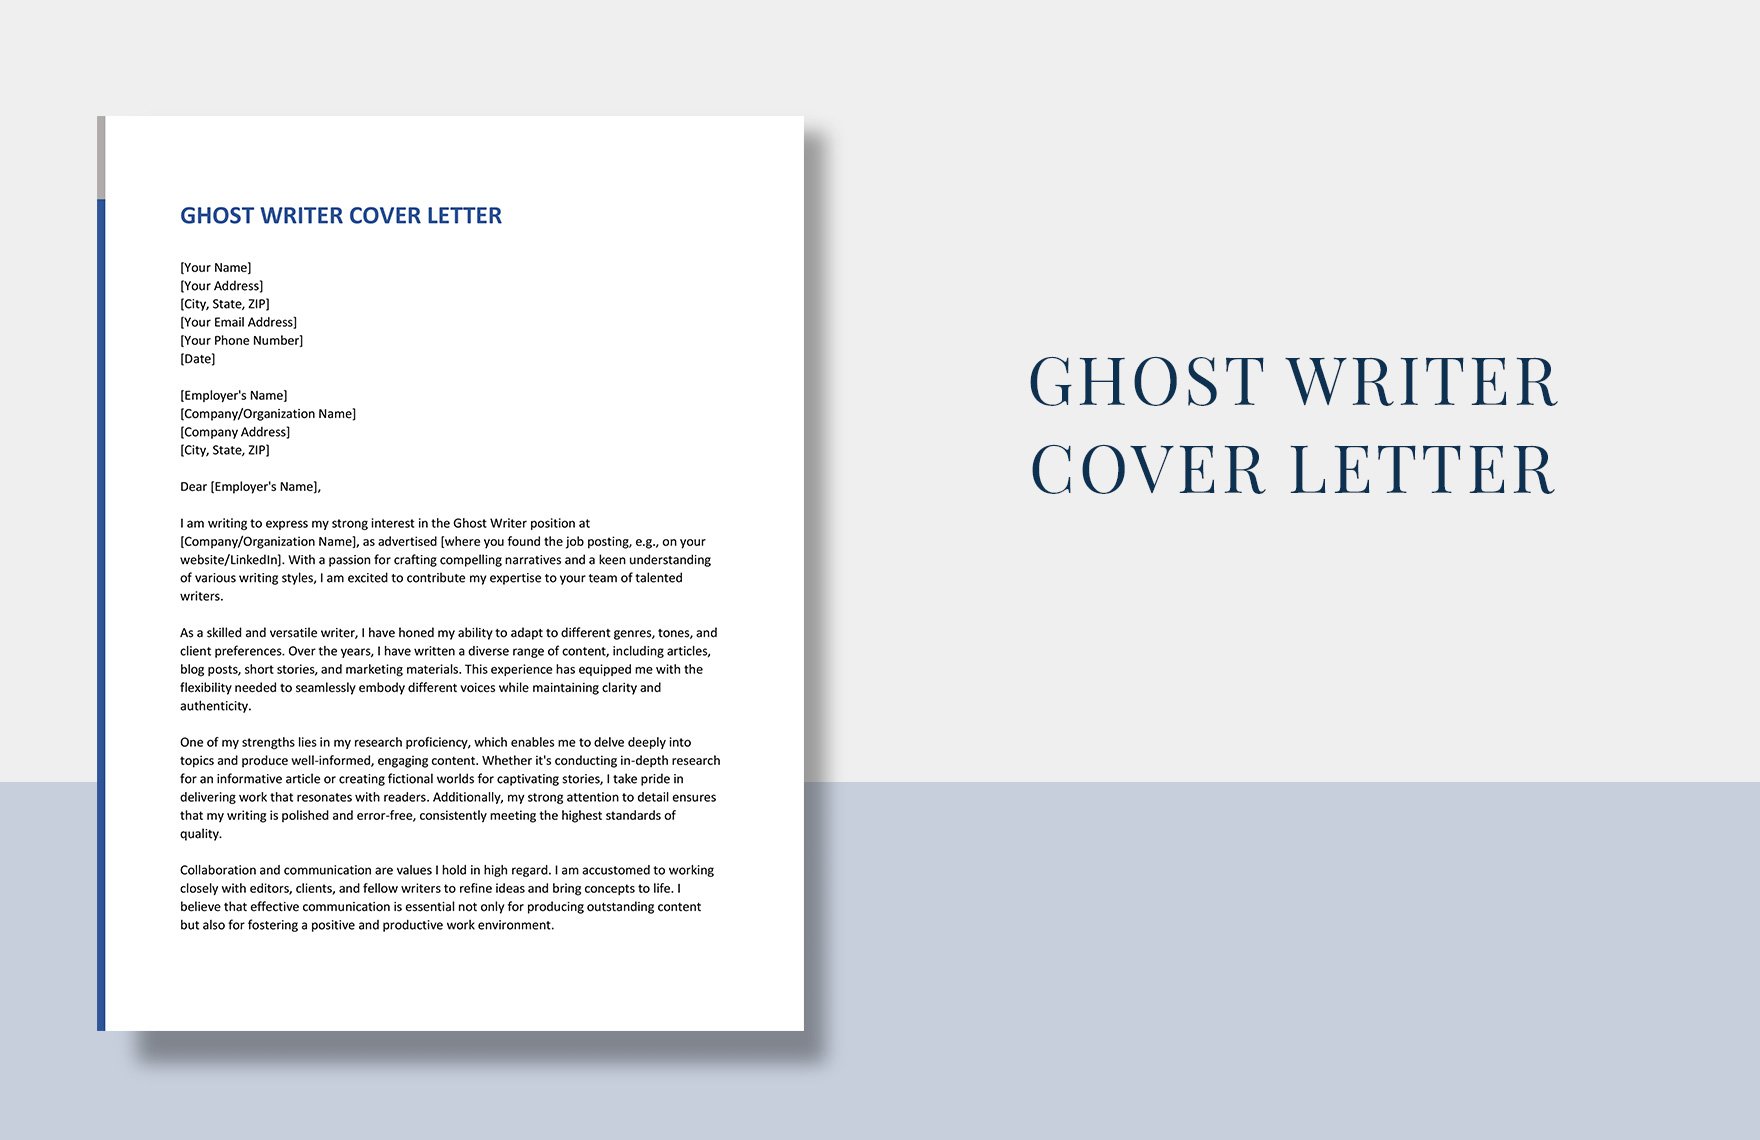 Ghost Writer Cover Letter